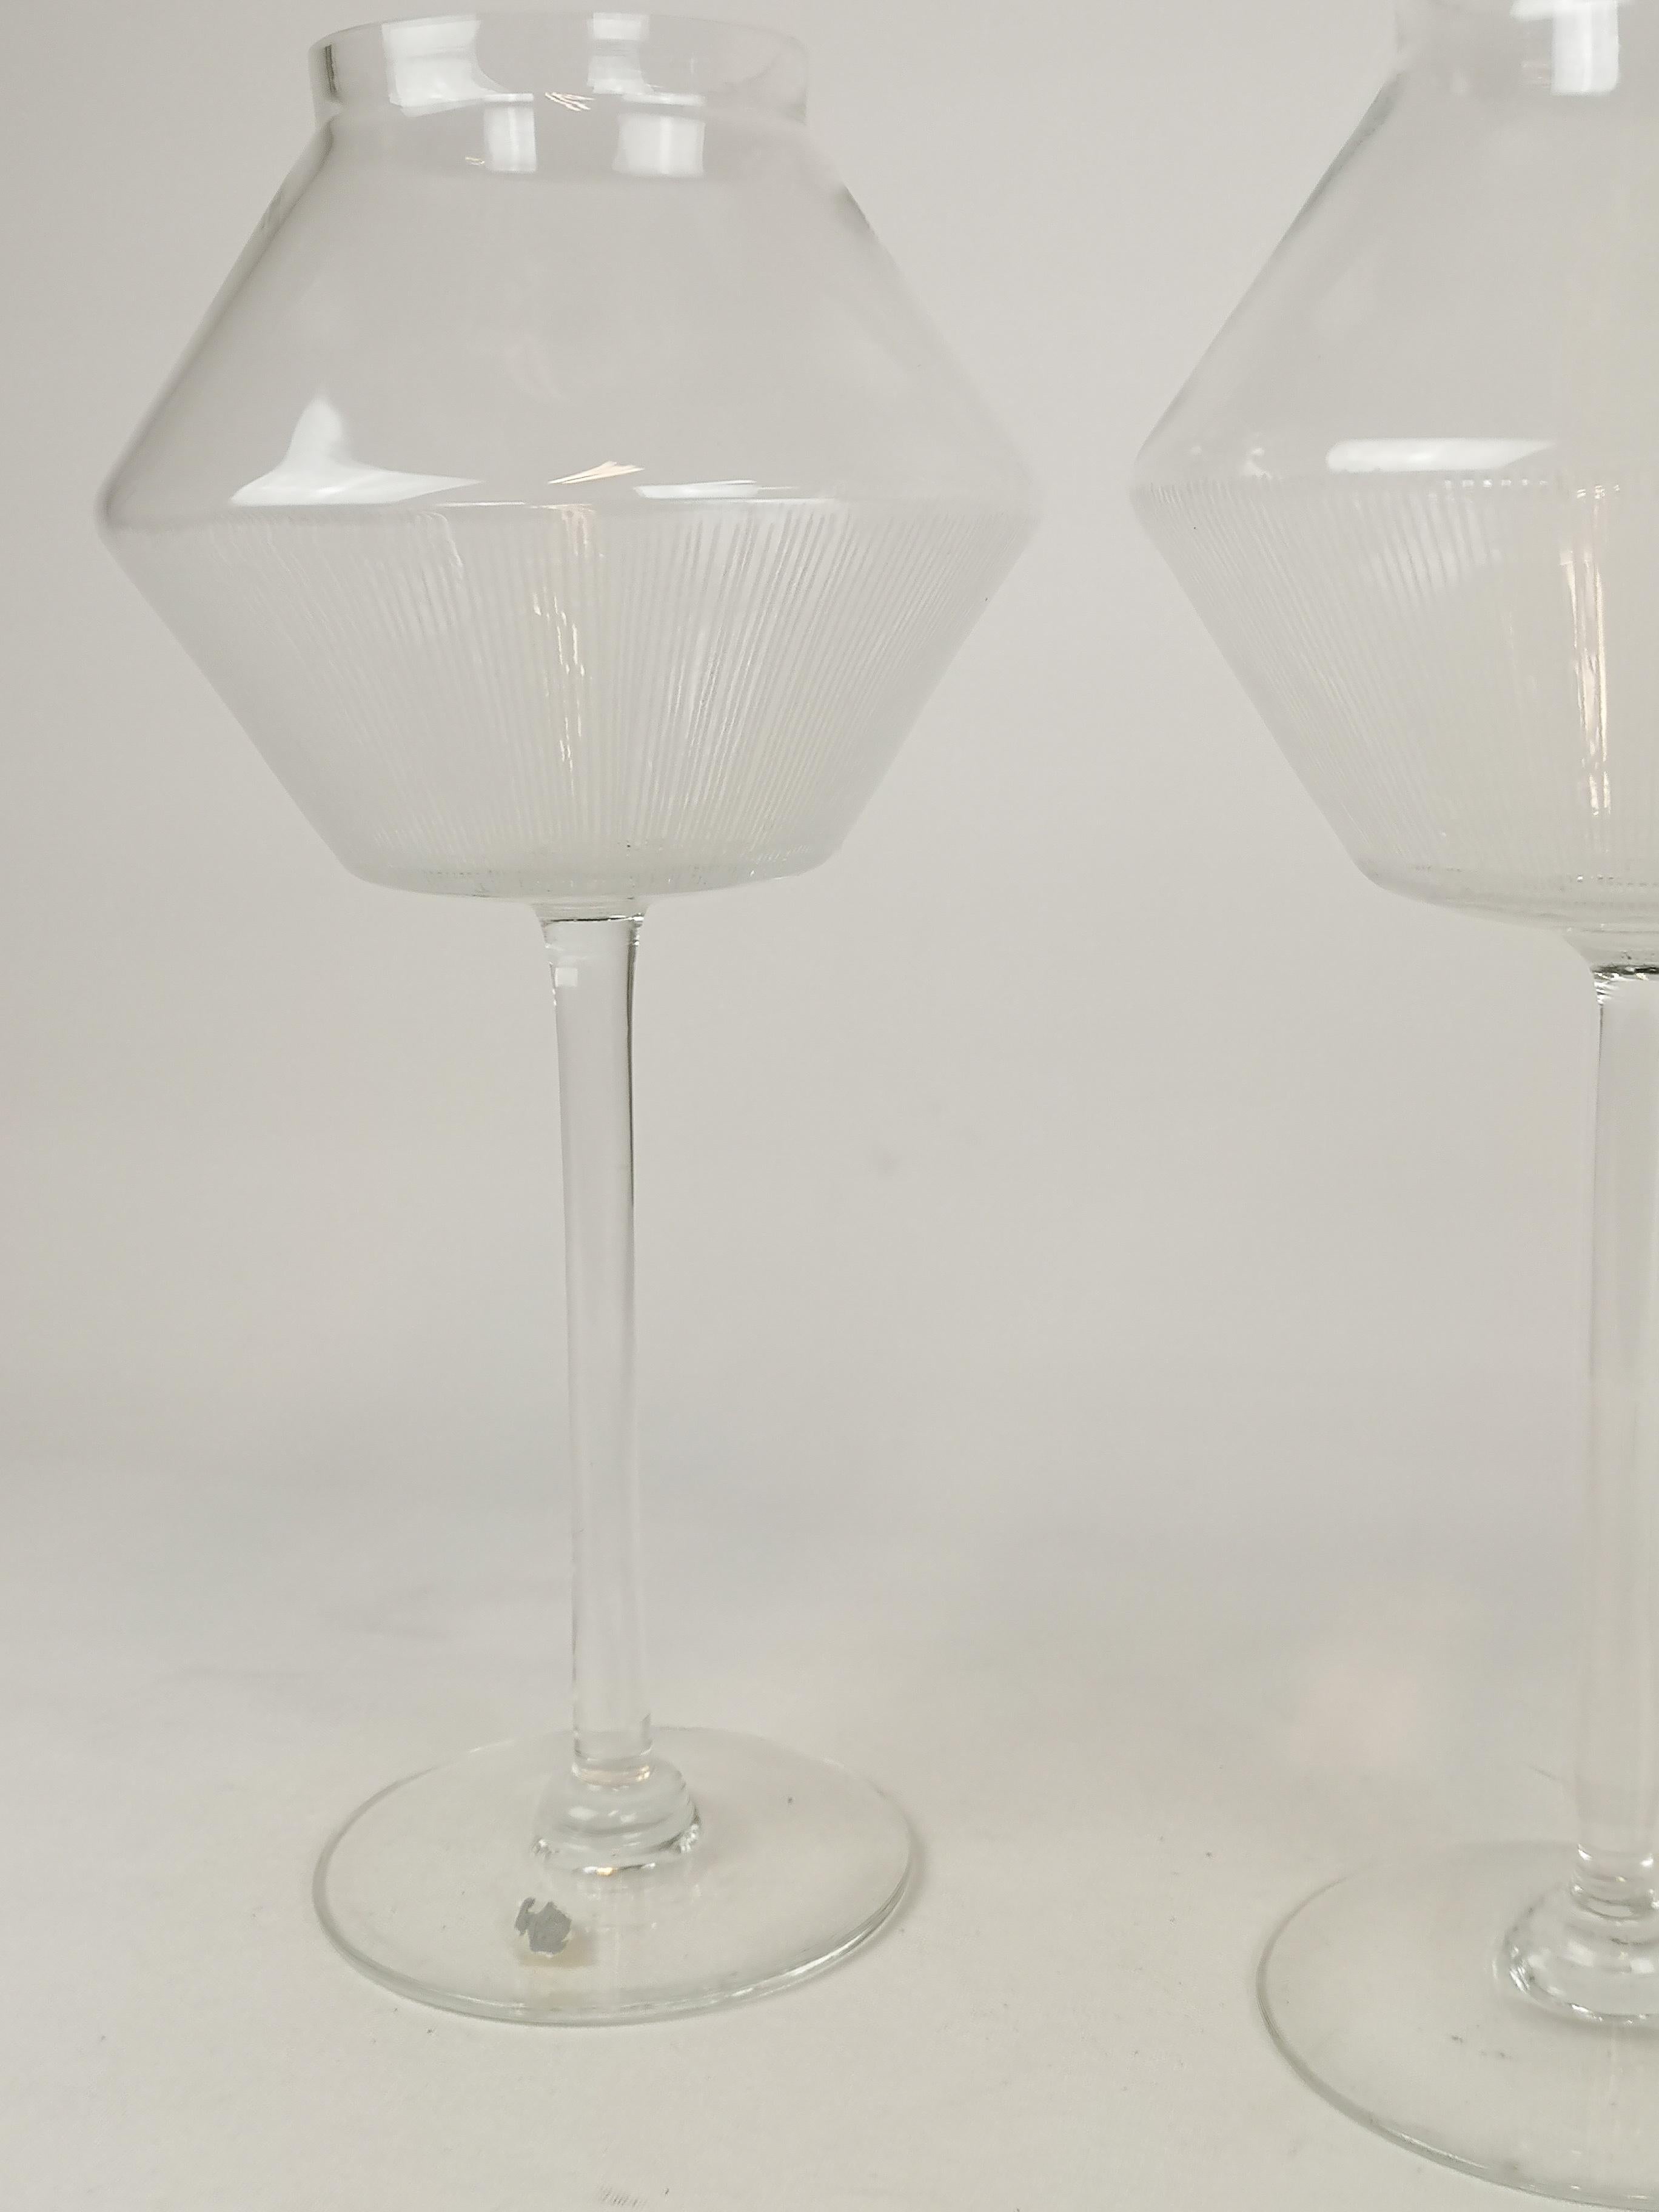 These 2 rare glass pieces were made in Johansfors Sweden and designed by Bengt Orup in the 1950s. The large candleholders are made with stripes on the glass, much like of the series Strikt. 

Very nice condition.

Measures: H 33 cm D 16 cm.
  